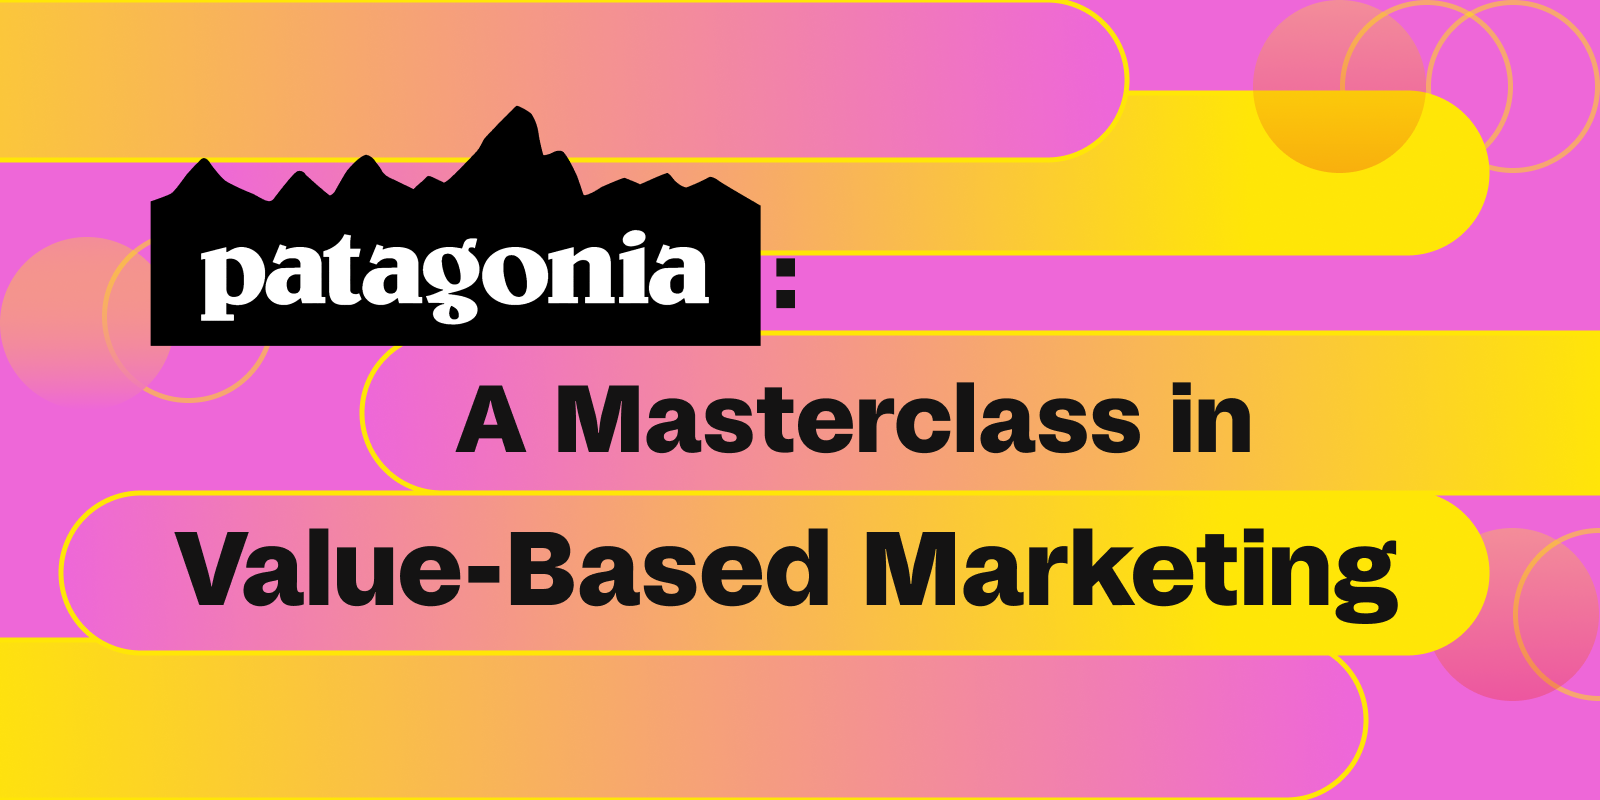 Patagonia's Growth Strategy: A Masterclass in Value-Based